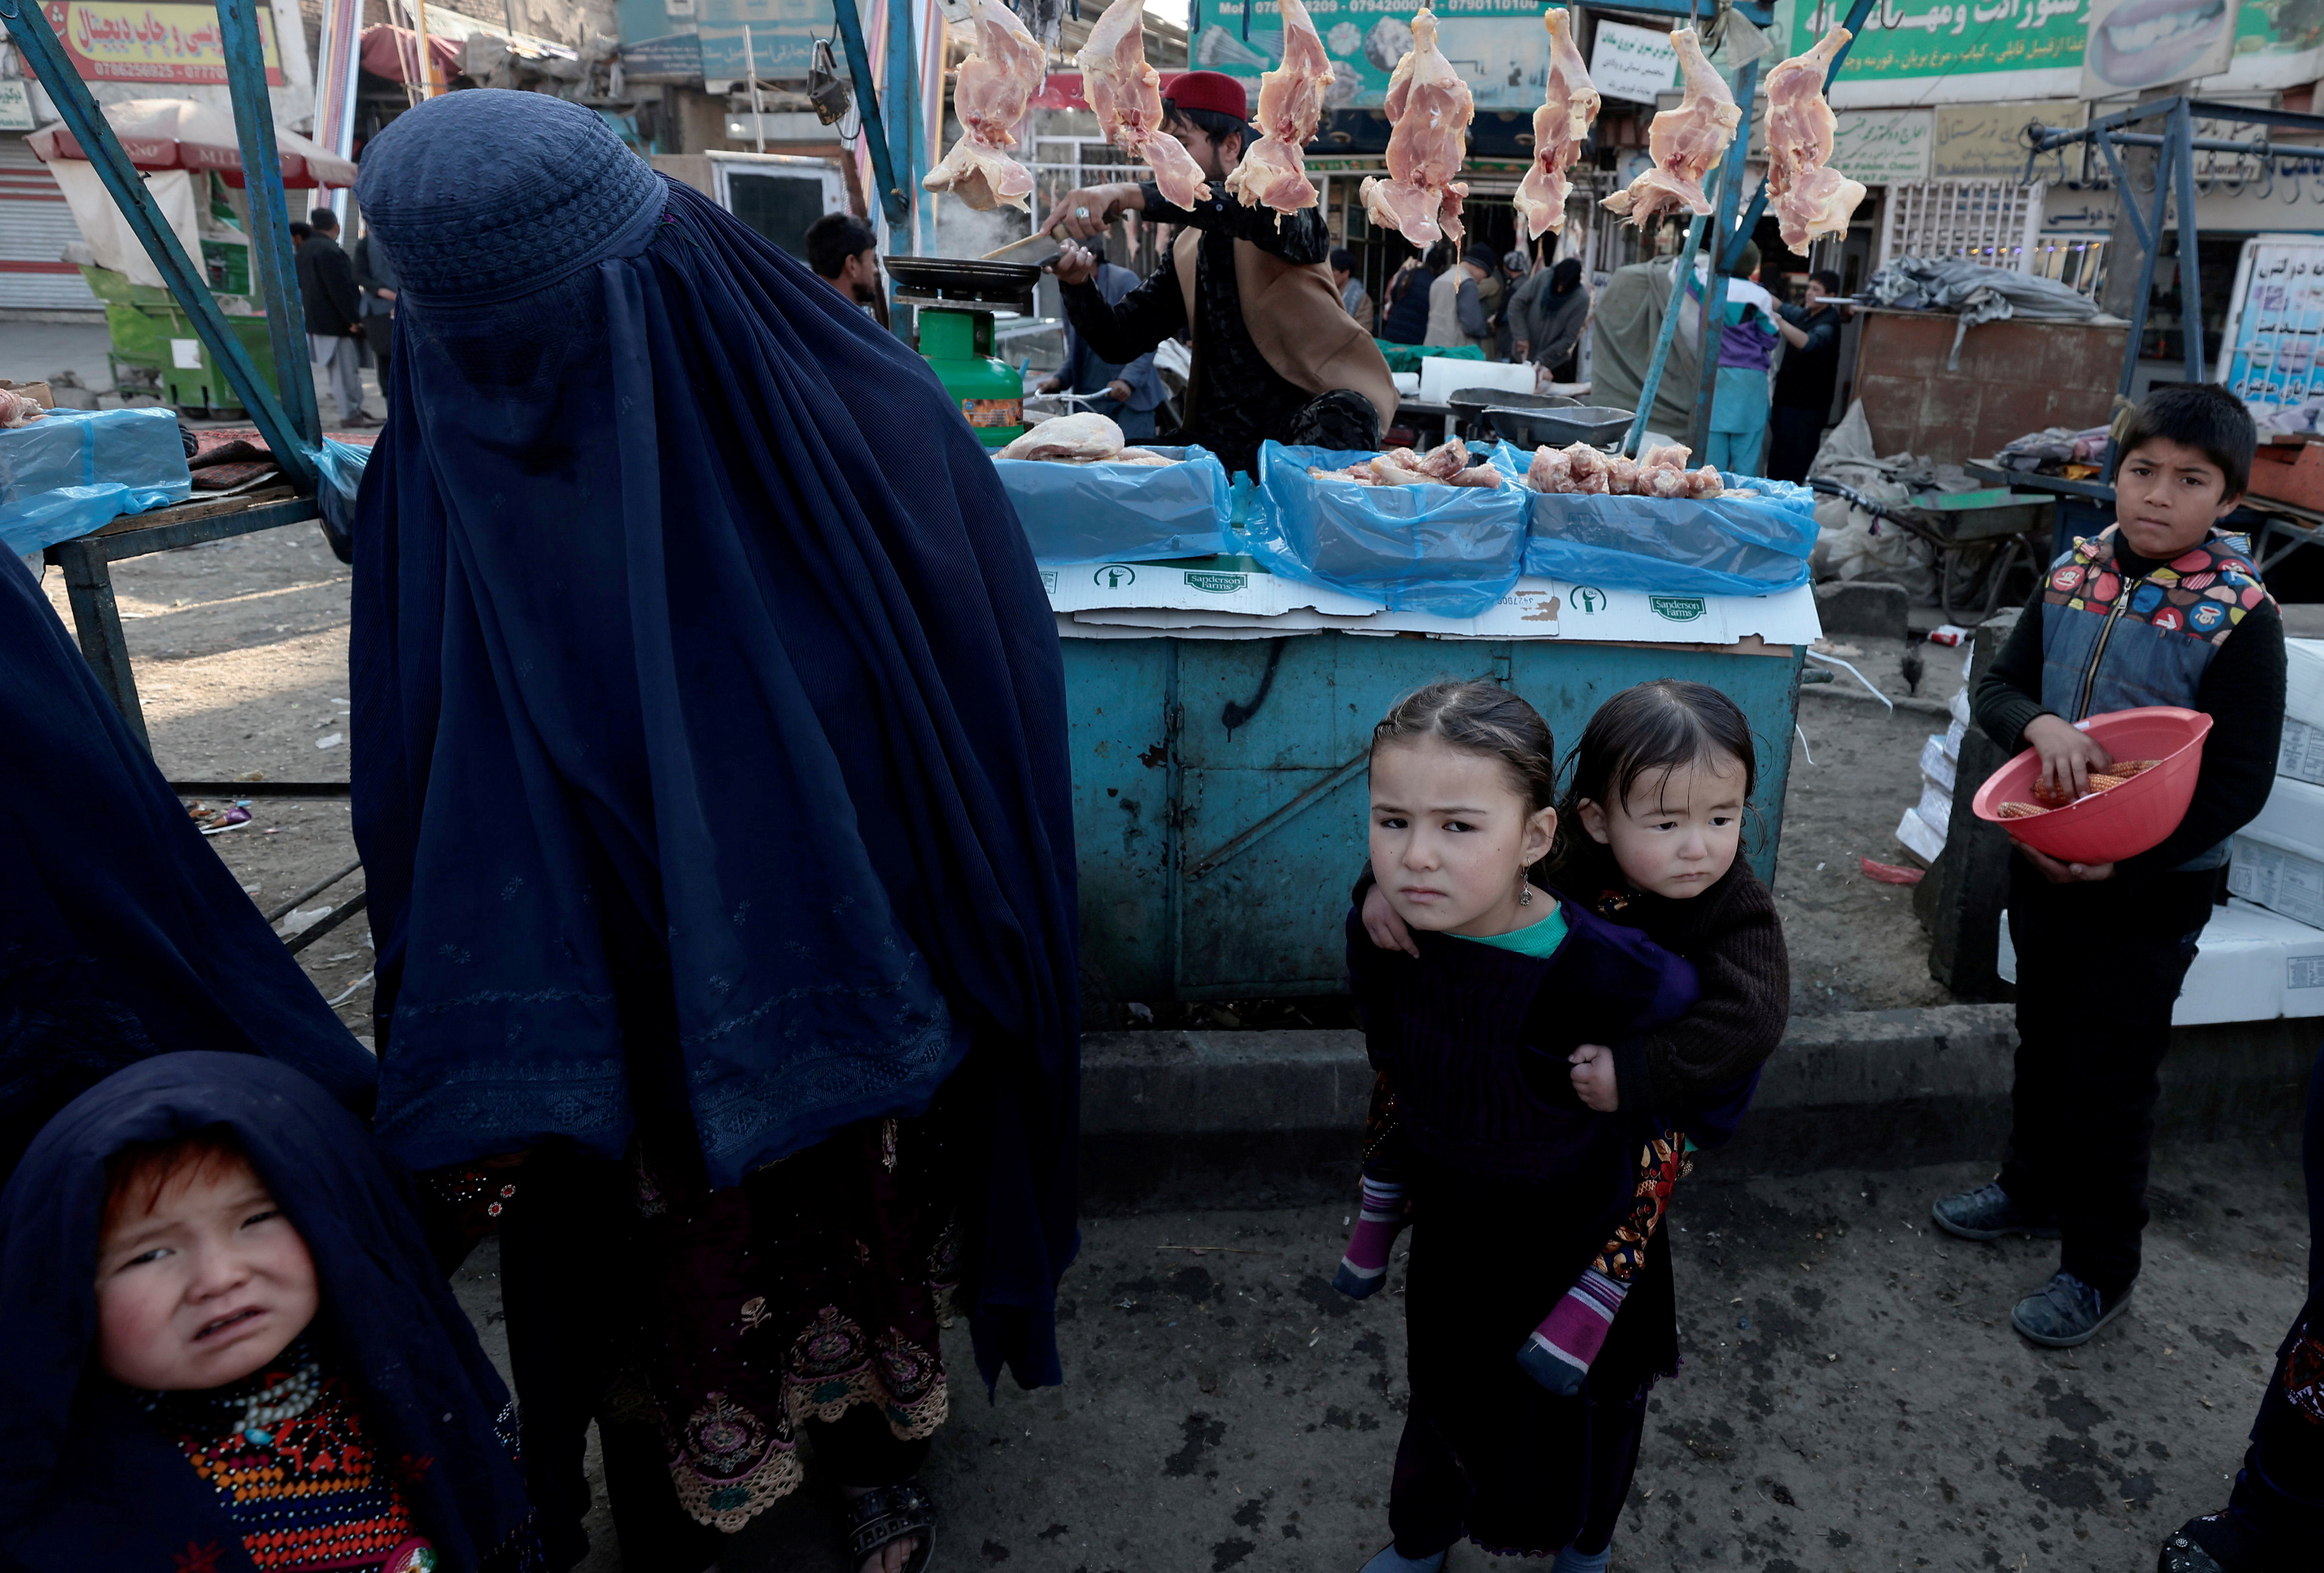 A mother shops with her children at the market in Kabul